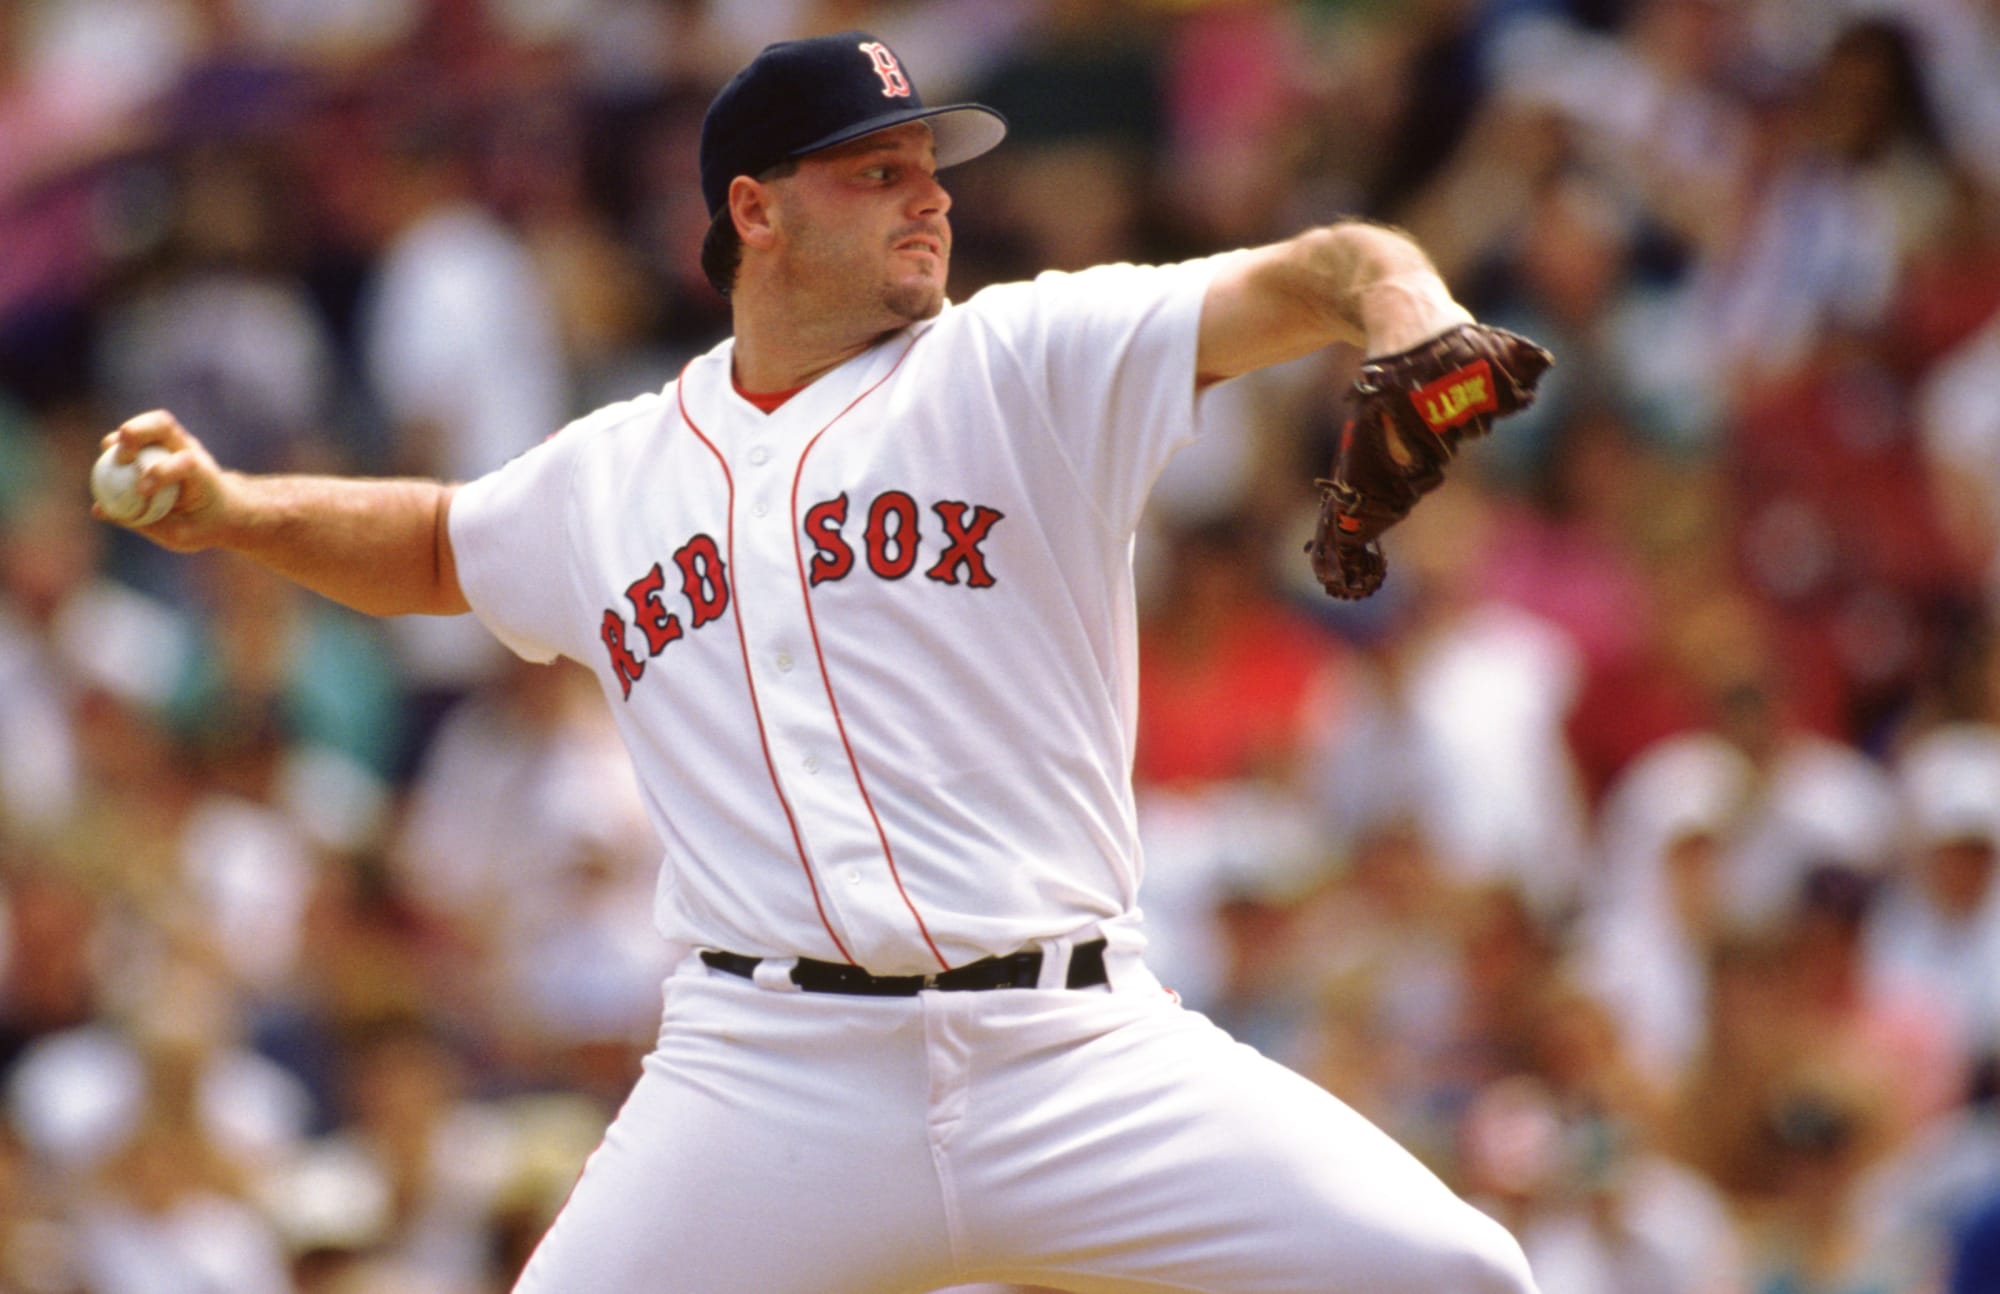 Boston Red Sox Time to retire Roger Clemens number?